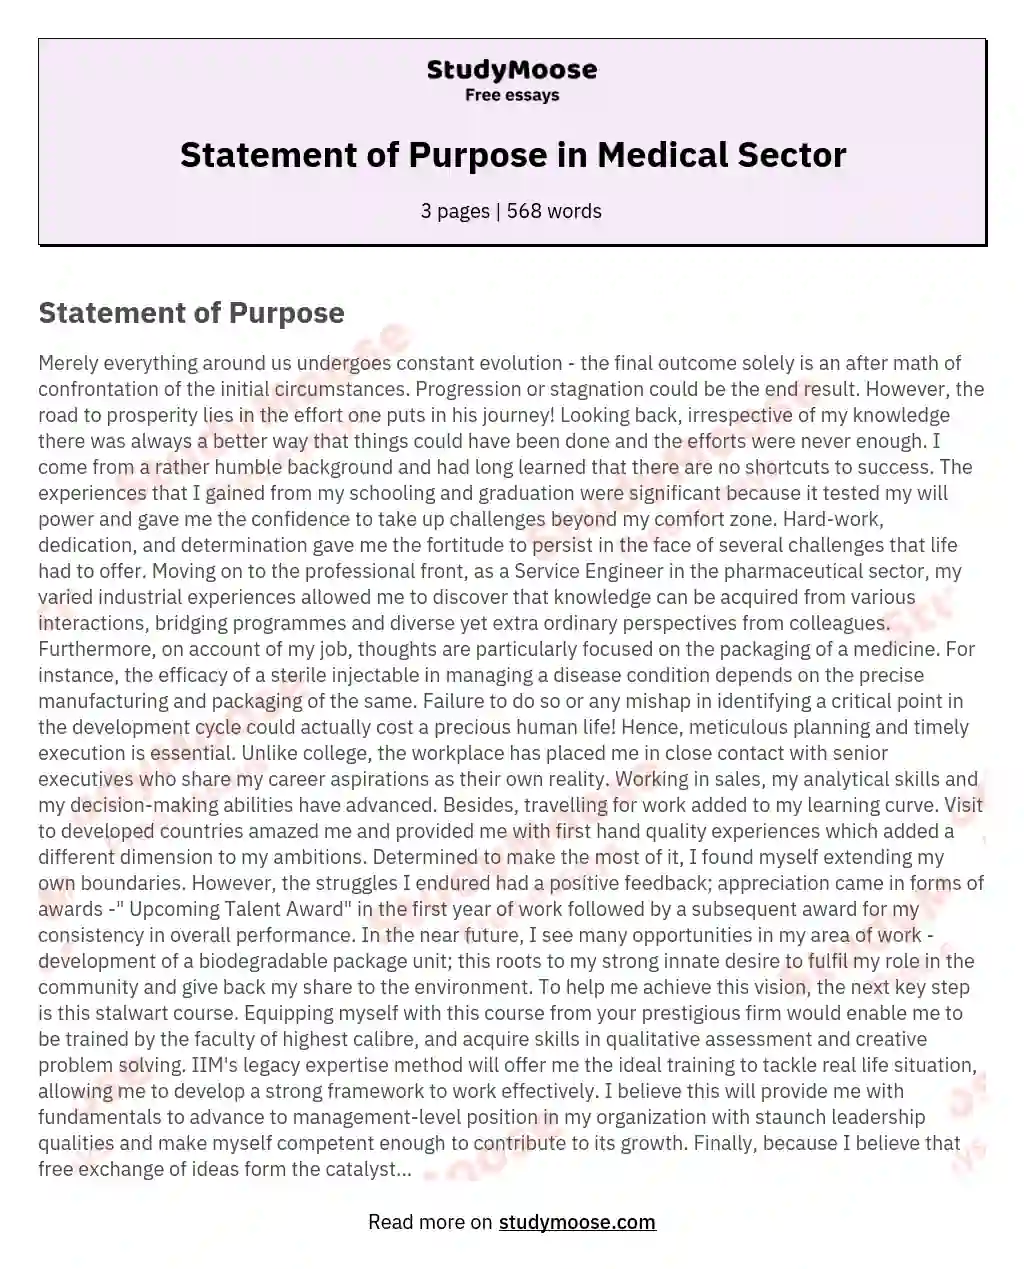 Statement of Purpose in Medical Sector essay